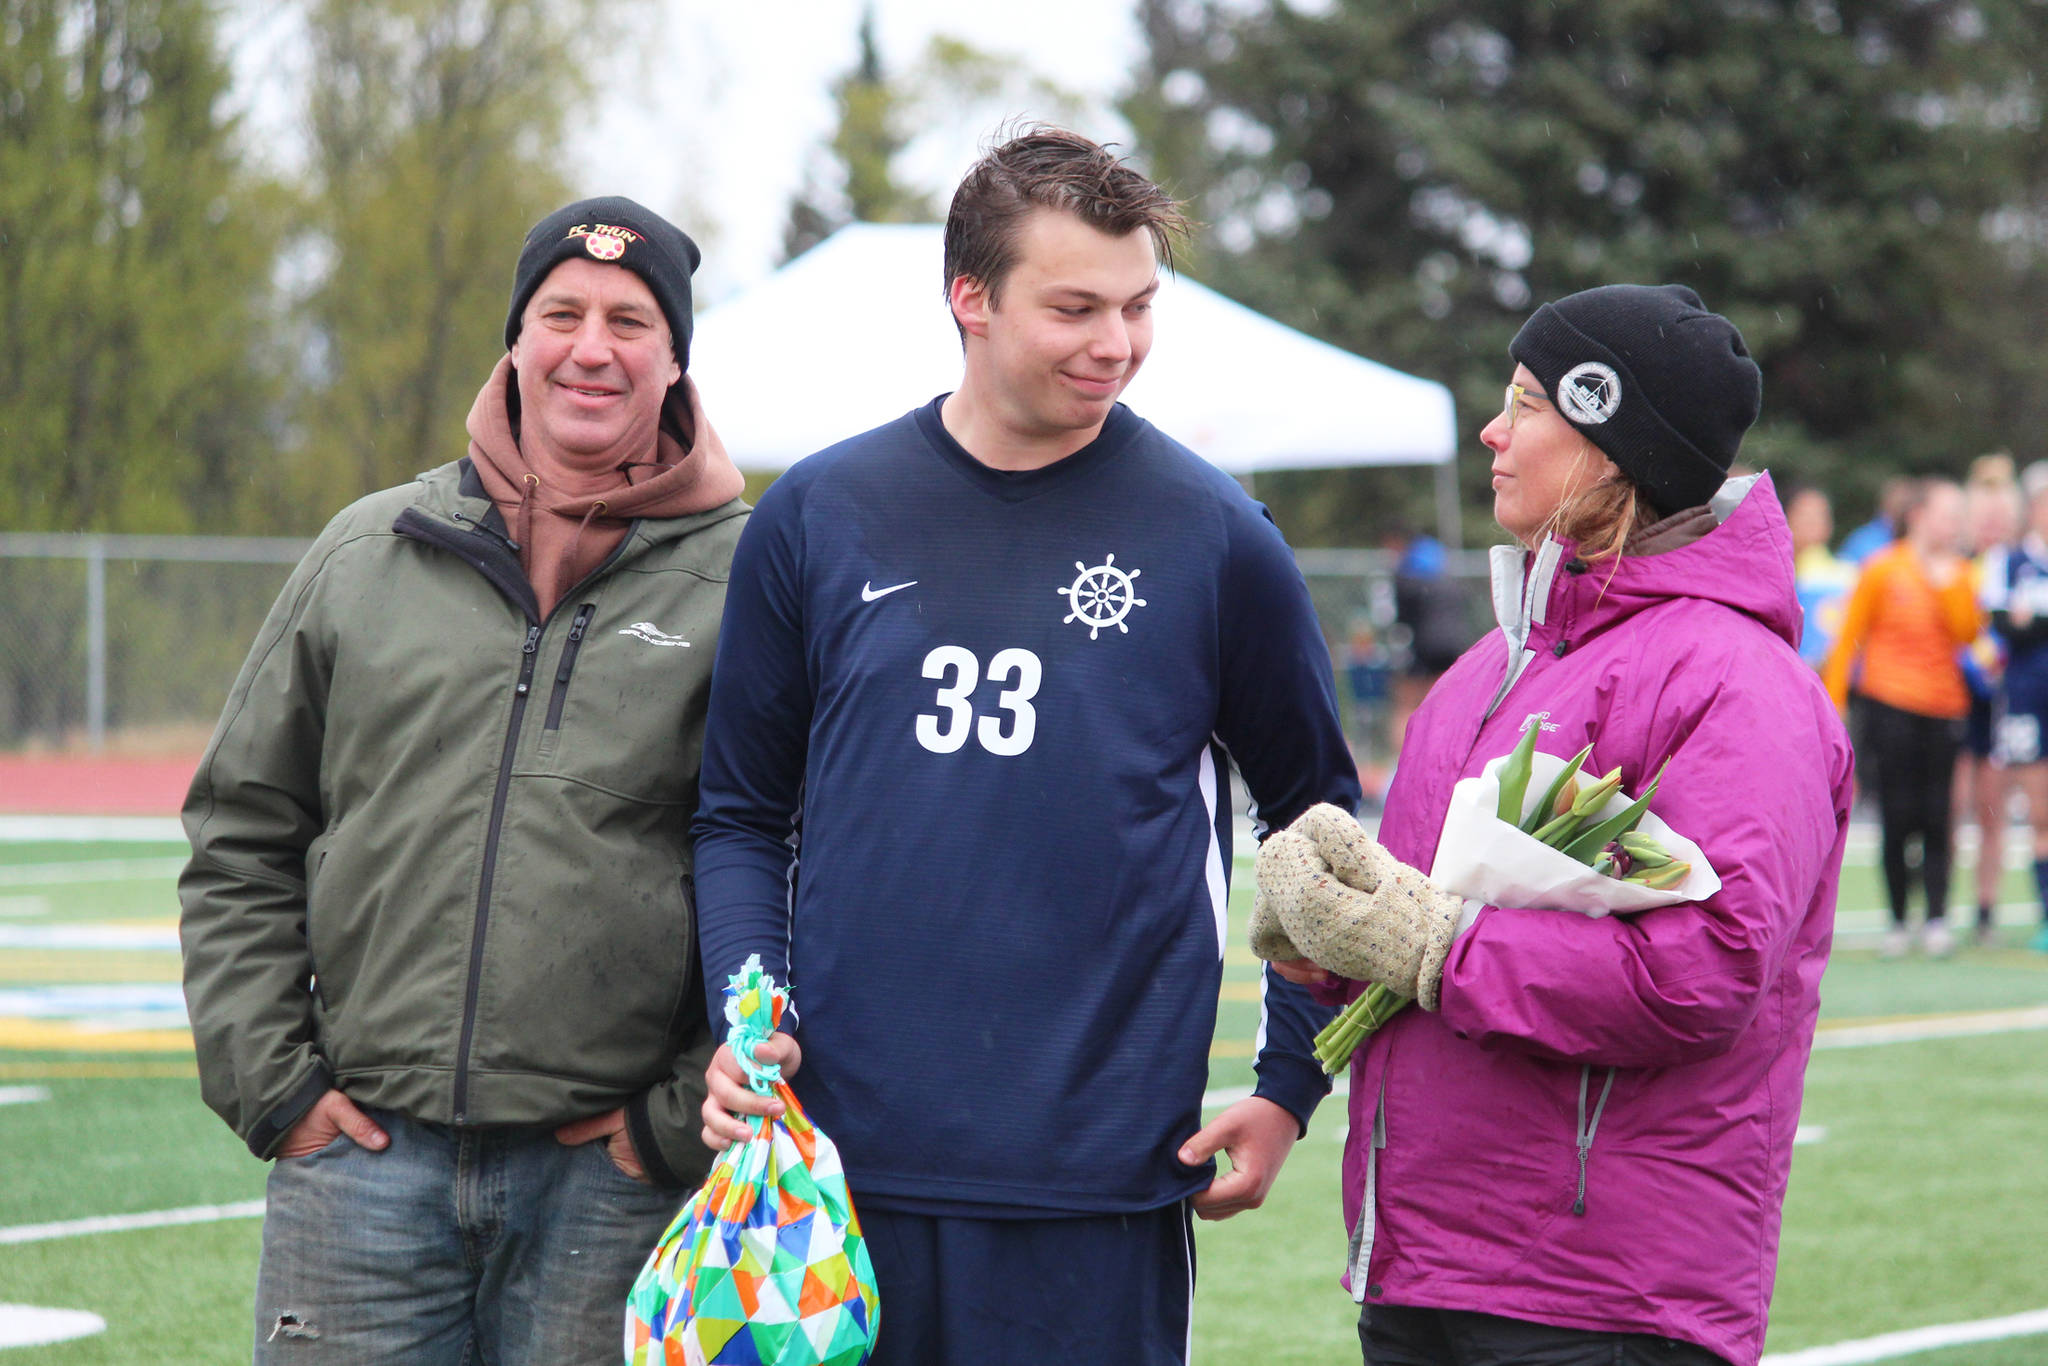 Midfielder Henry Russell celebrates with his parents while being recognized during a Senior Night ceremony between soccer games Friday, May 10, 2019 at Homer High School in Homer, Alaska. (Photo by Megan Pacer/ Homer News)